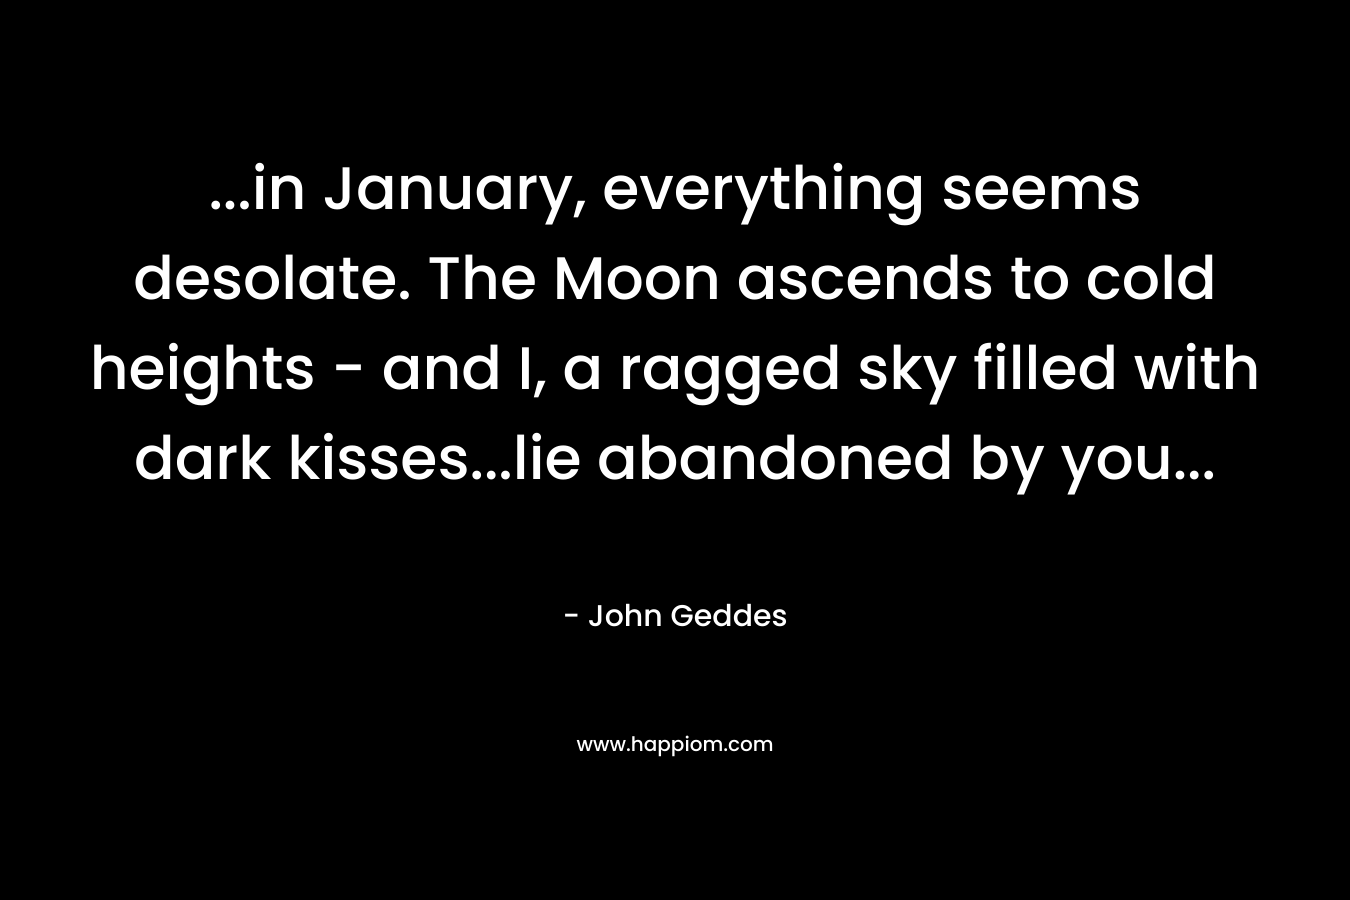 ...in January, everything seems desolate. The Moon ascends to cold heights - and I, a ragged sky filled with dark kisses...lie abandoned by you...